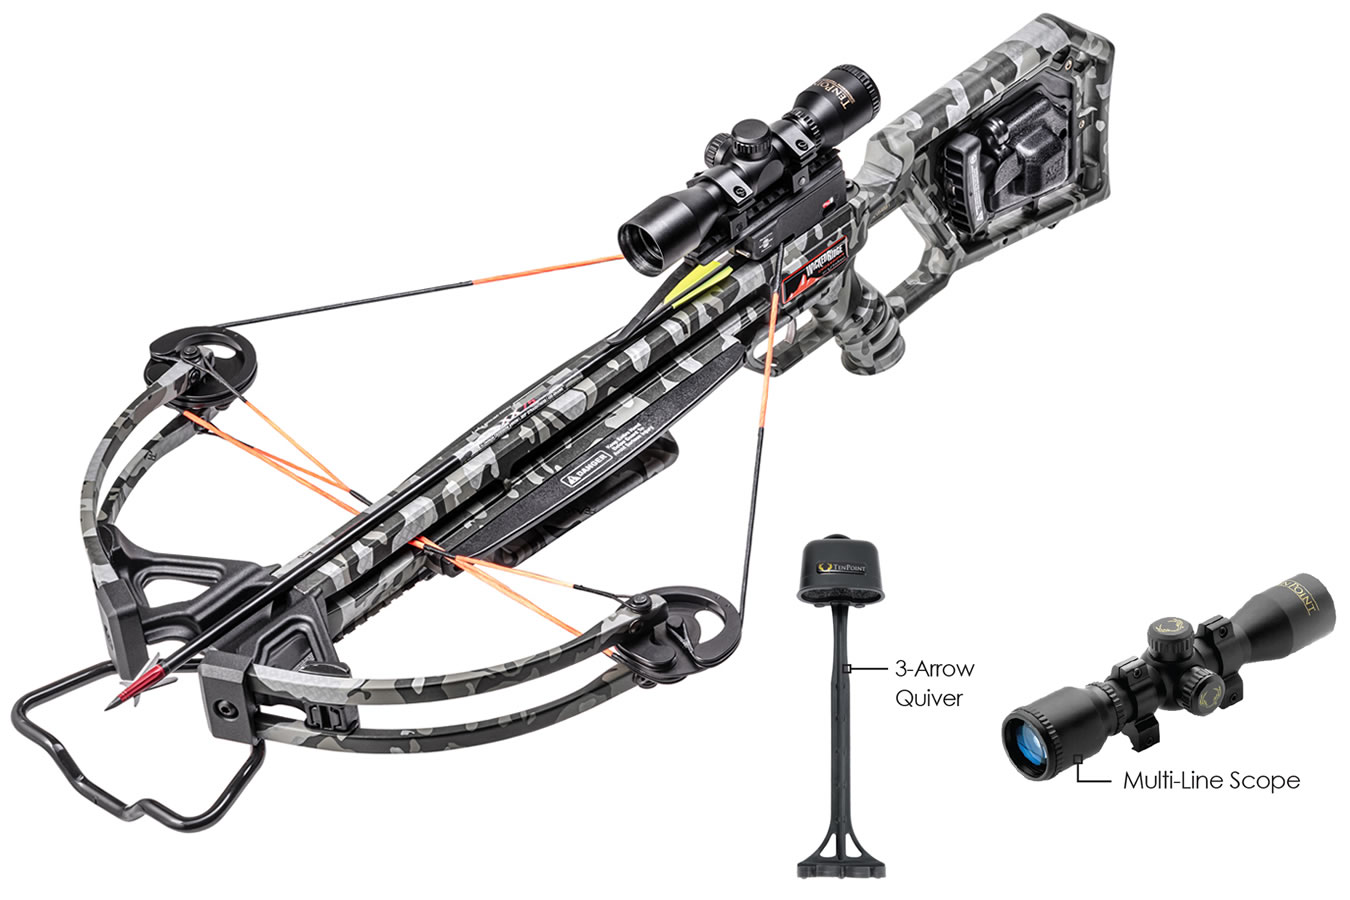 RAMPAGE 360 ACU DRAW CROSSBOW PACKAGE